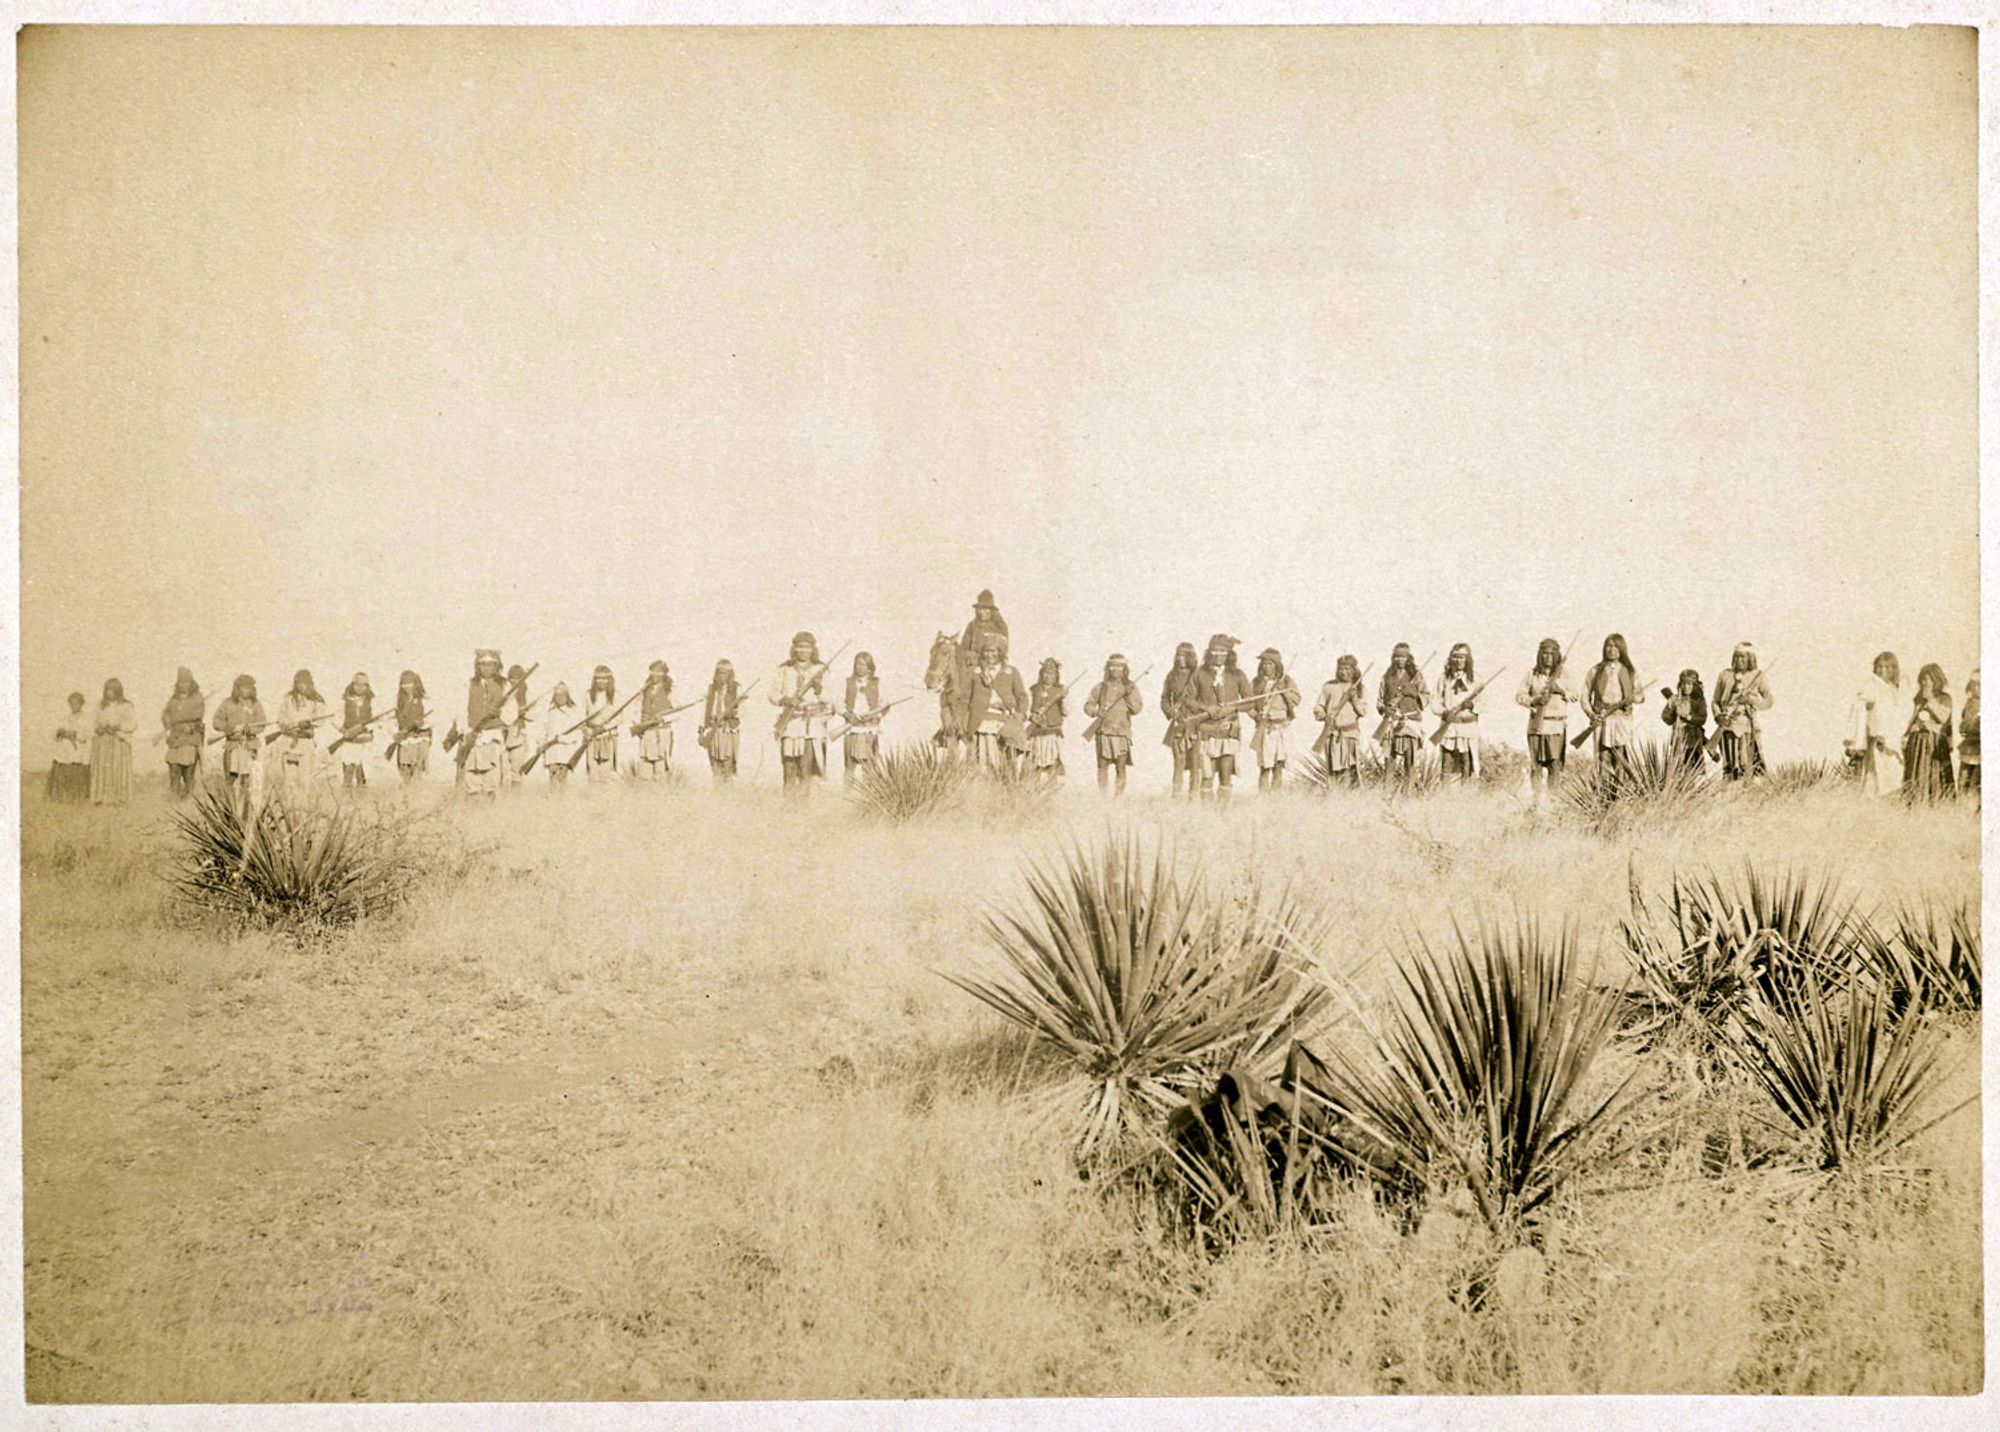 Printed on Back of Photo: "Scene in Geronimo's camp, the Apache outlaw and murderer. Taken before the surrender to Gen. Crook, March 27, 1886, in the Sierra Madre mountains of Mexico, escaped March 30, 1886." This photo of Geronimo and his men was taken by C.S. Fly. His 15 images of the Apache are the only known photographs taken of an American Indian while they were still at war with the U.S.